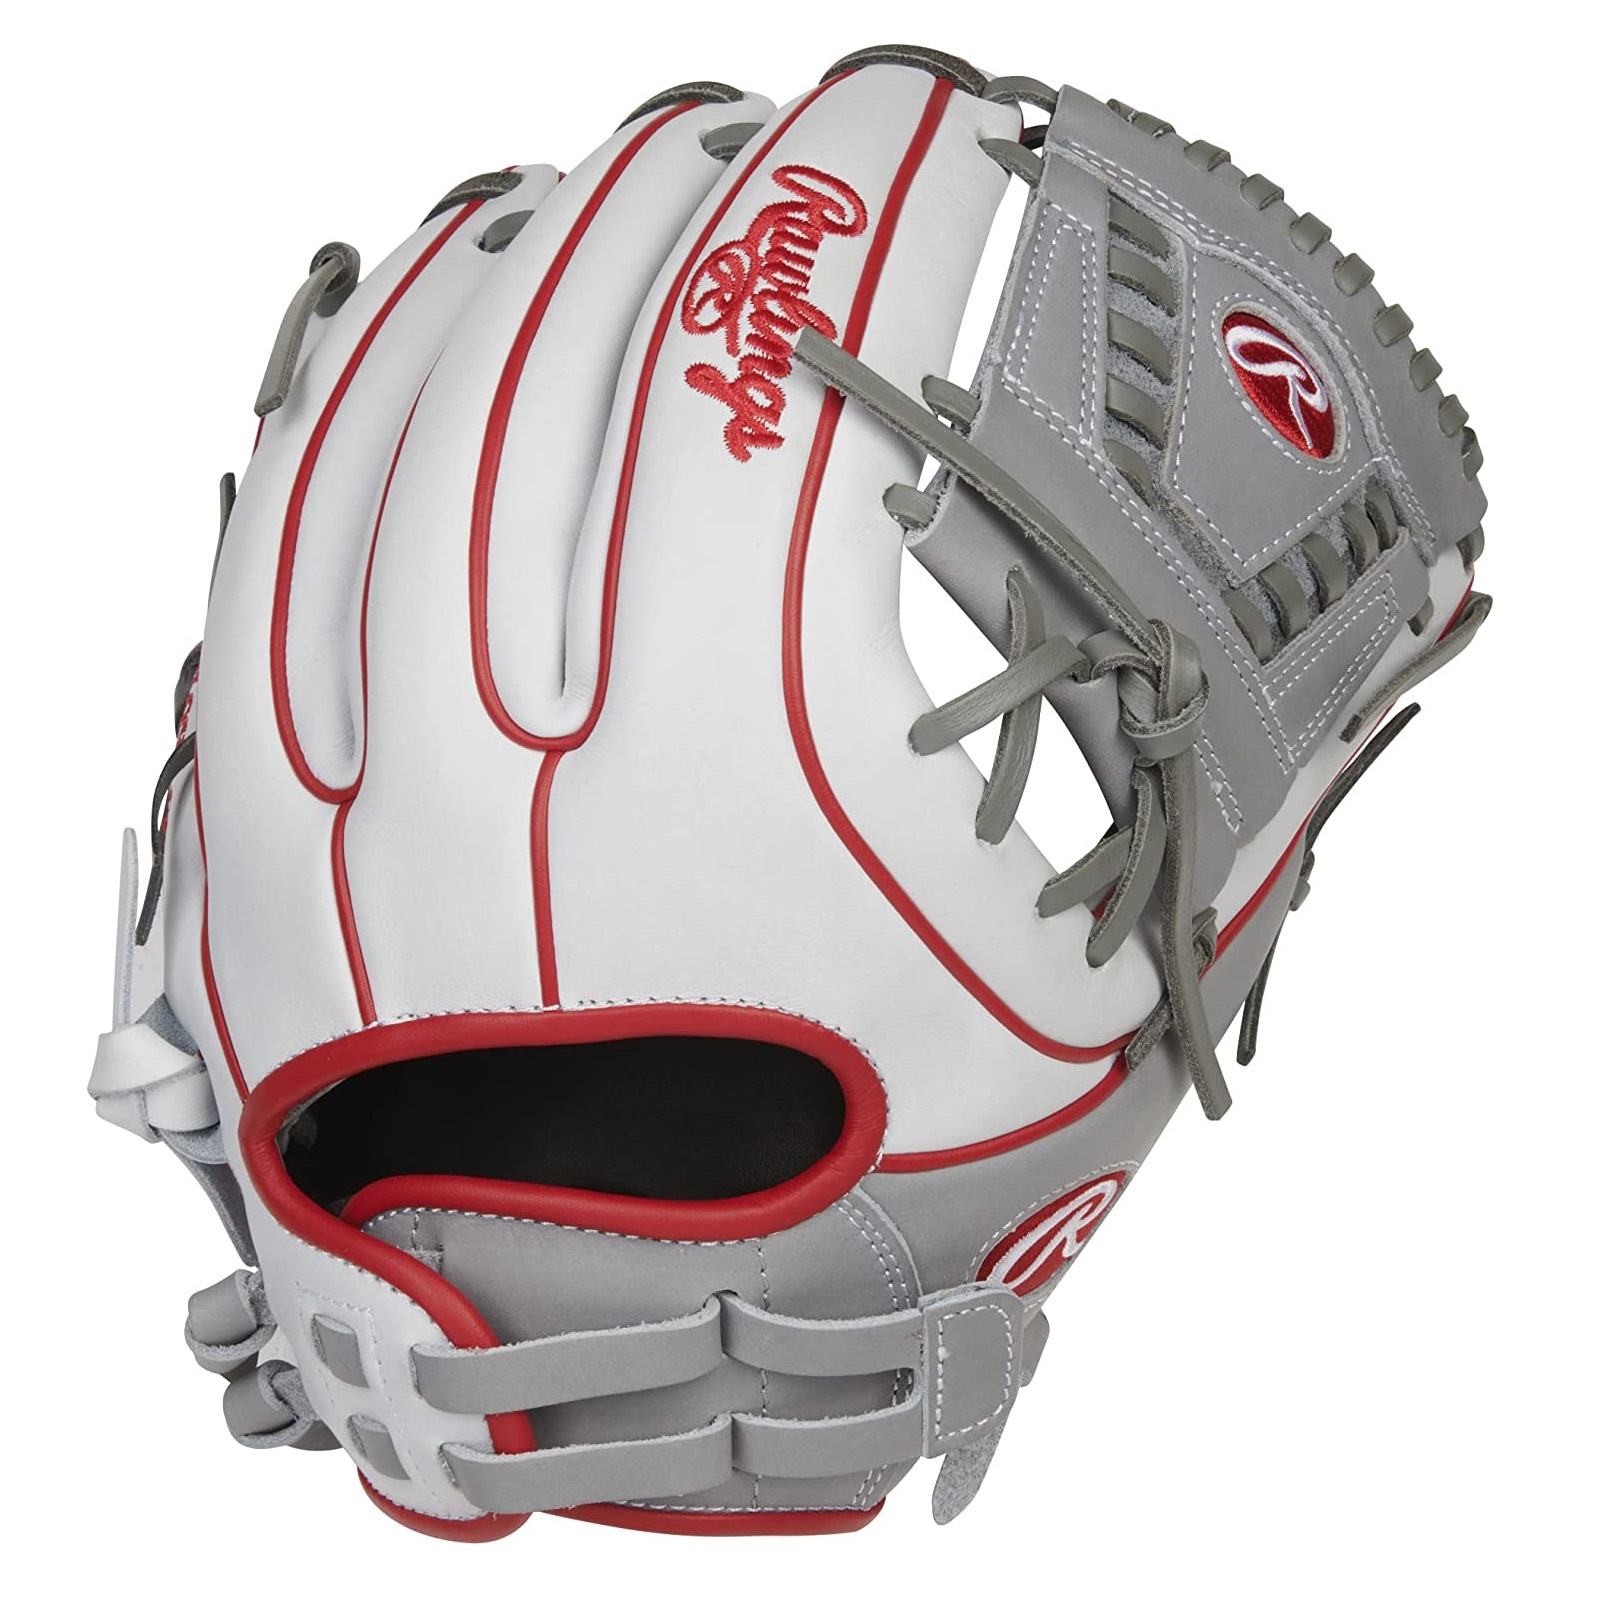 rawlings-heart-of-the-hide-softball-glove-12-laced-1-piece-web-right-hand-throw PRO716SB-31WG-RightHandThrow Rawlings  The Heart of the Hide fastpitch softball gloves from Rawlings provide